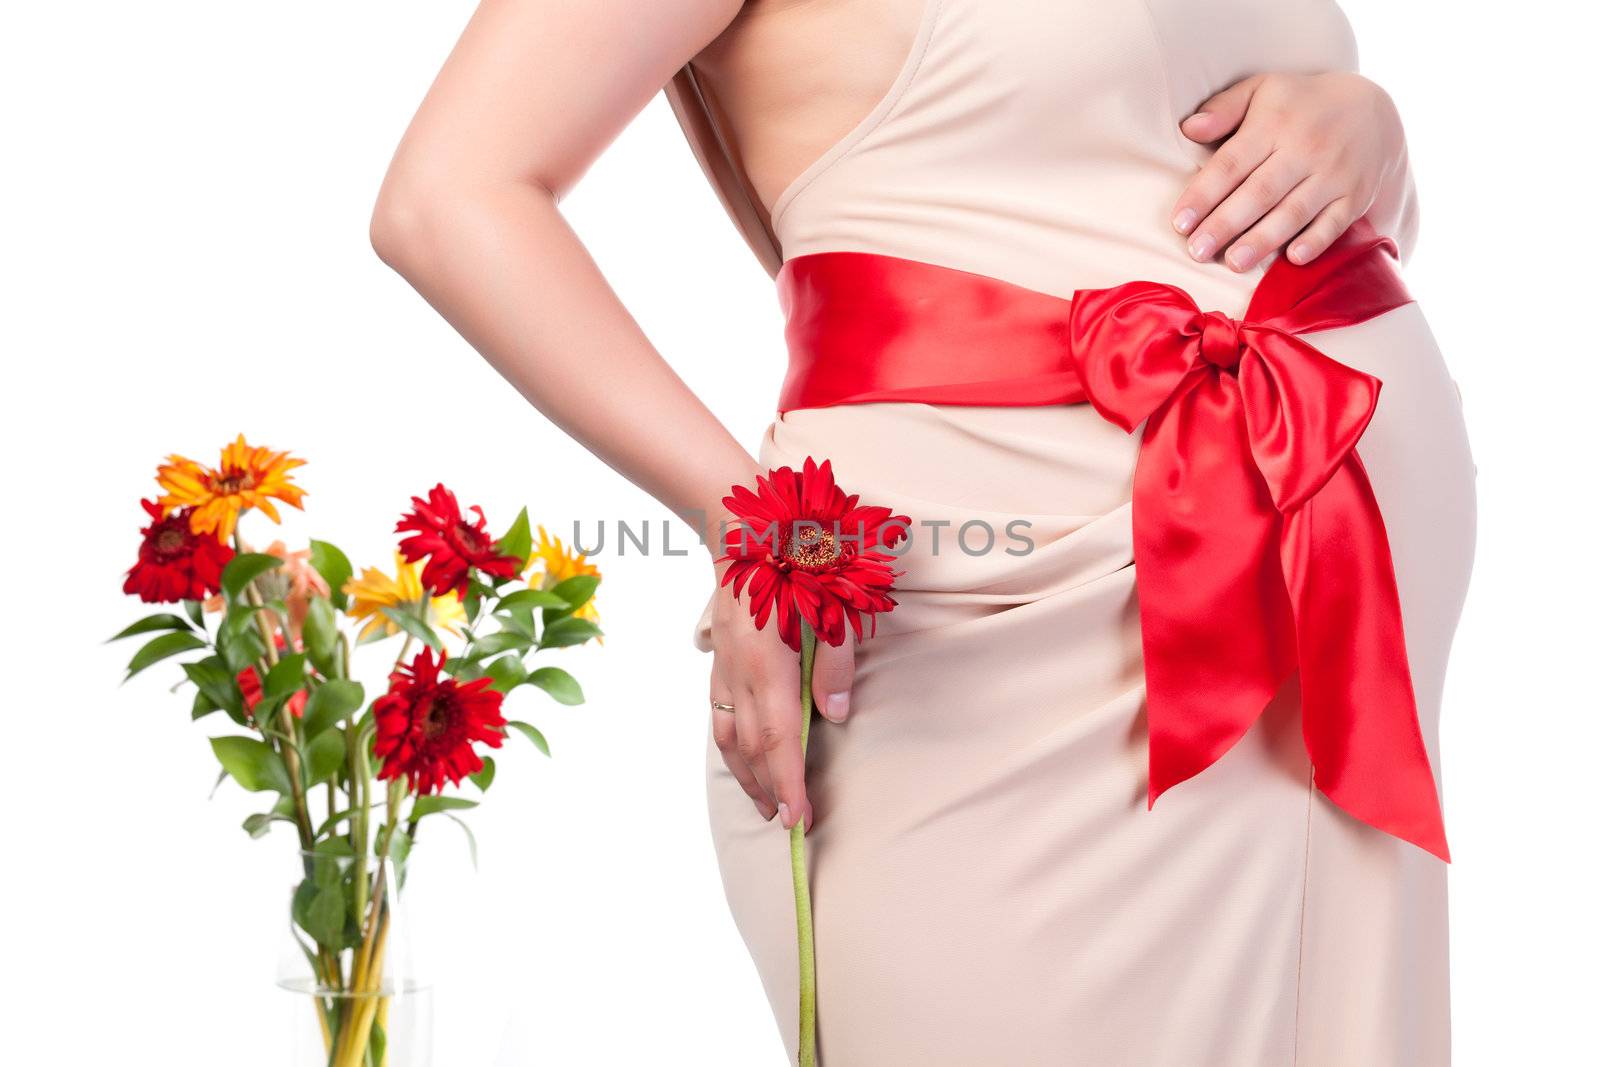 Pregnant Woman with Flowers by Discovod